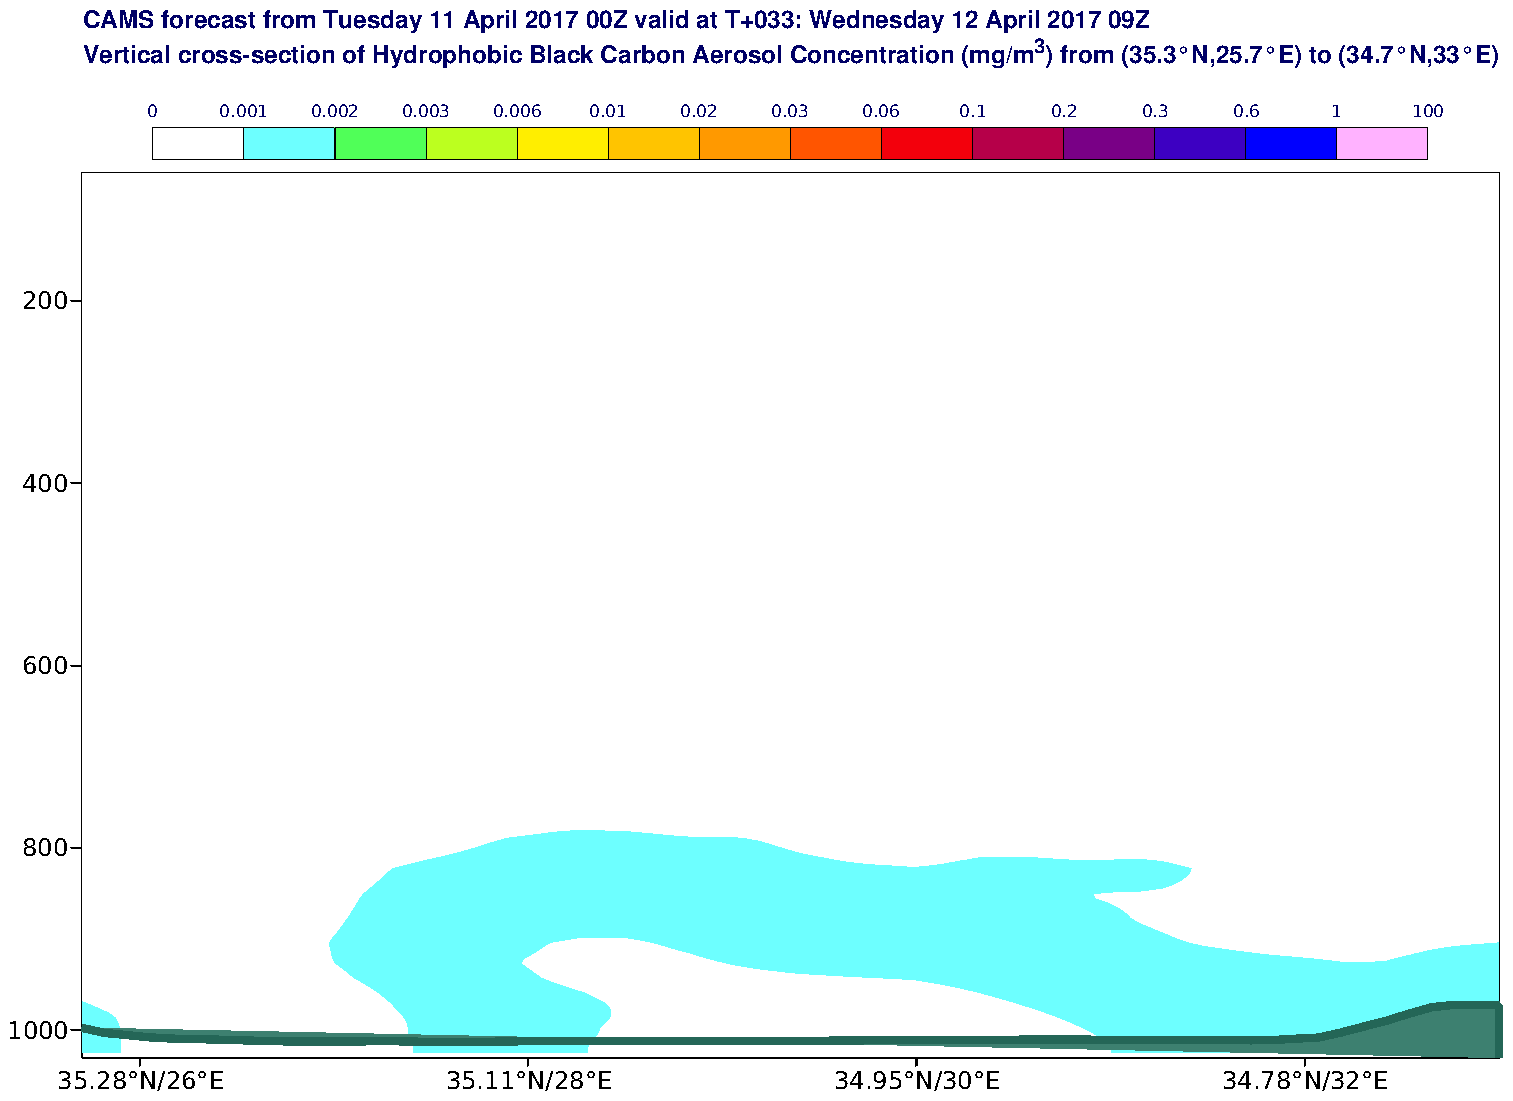 Vertical cross-section of Hydrophobic Black Carbon Aerosol Concentration (mg/m3) valid at T33 - 2017-04-12 09:00